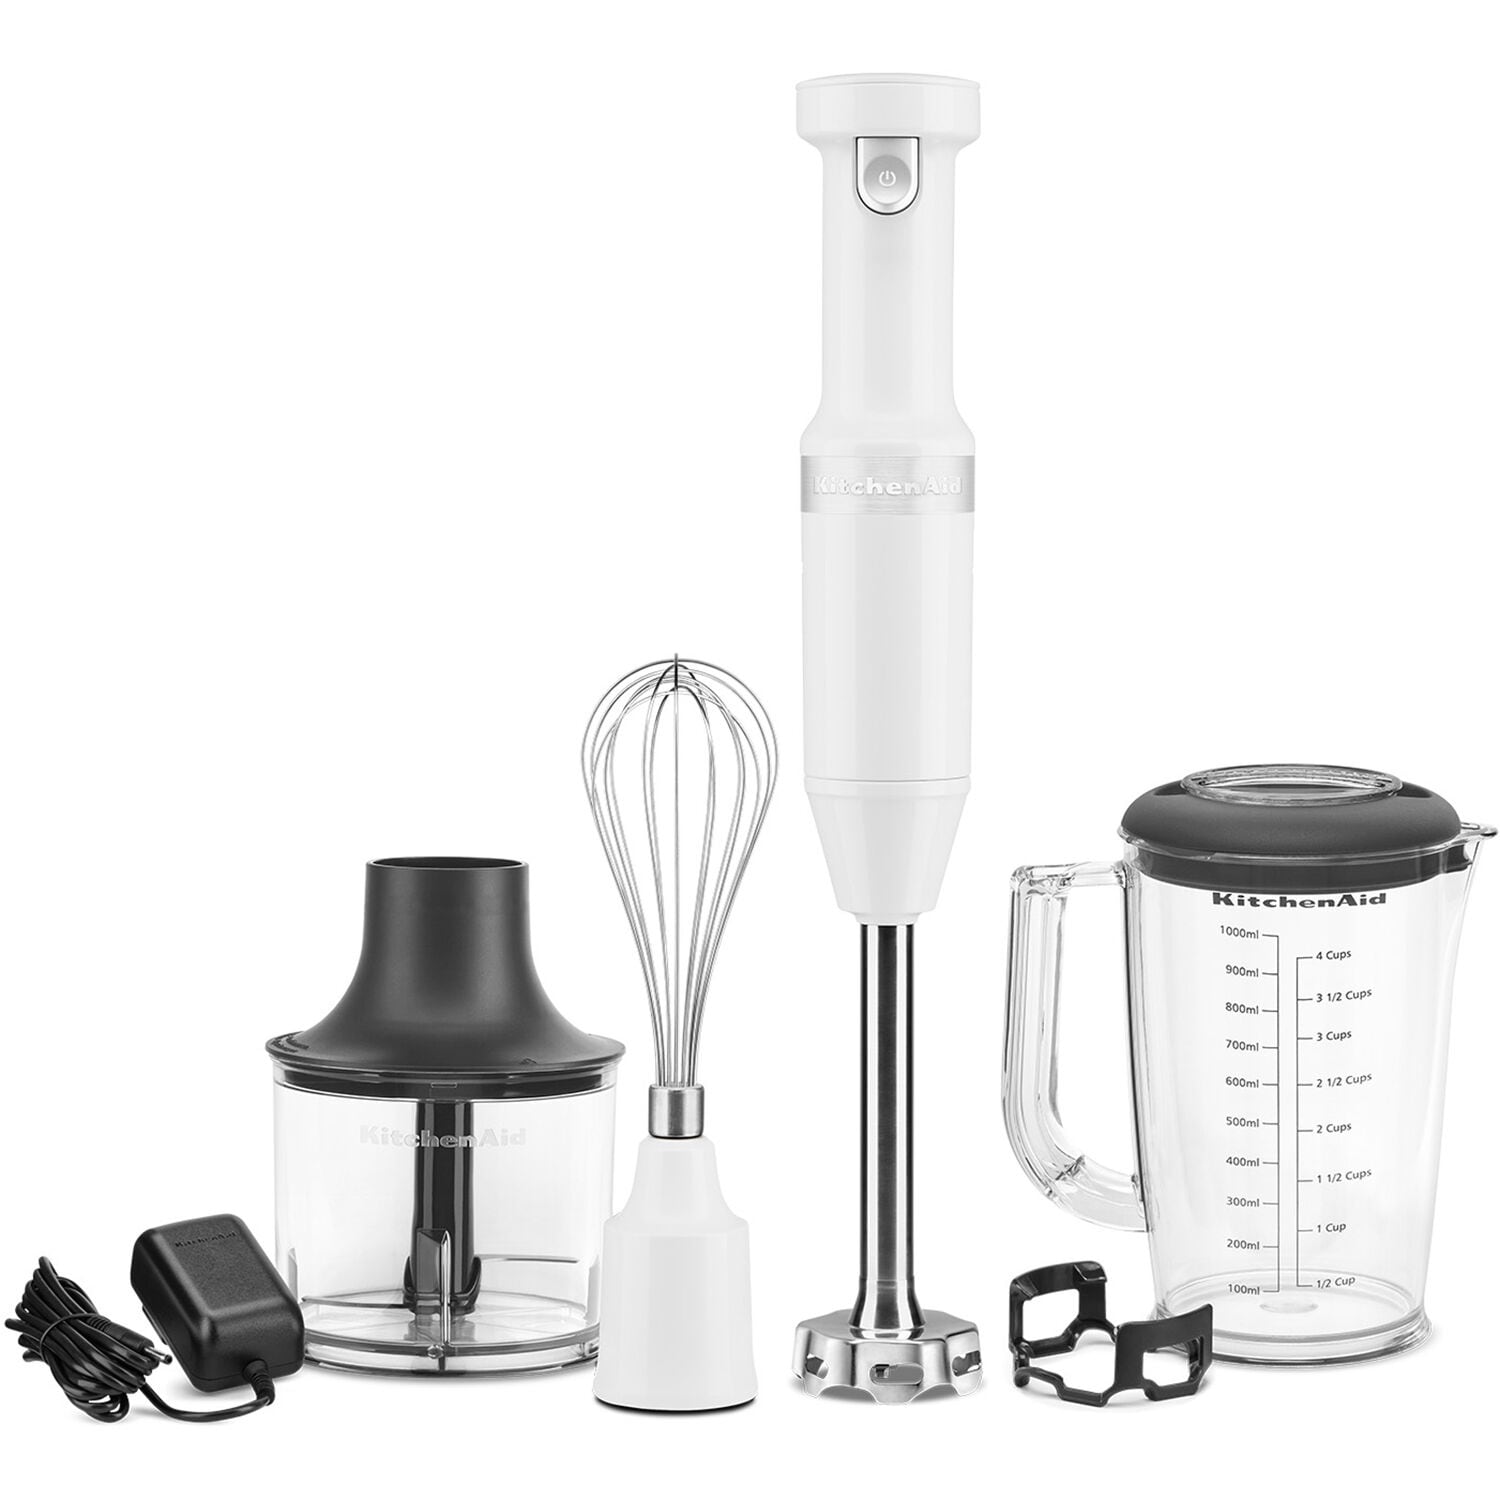 https://ak1.ostkcdn.com/images/products/is/images/direct/b2eeaa4272562fa8b6bde10fb1f2497a193c42c3/KitchenAid-Cordless-Variable-Speed-Hand-Blender-with-Chopper-and-Whisk-Attachment-in-White.jpg